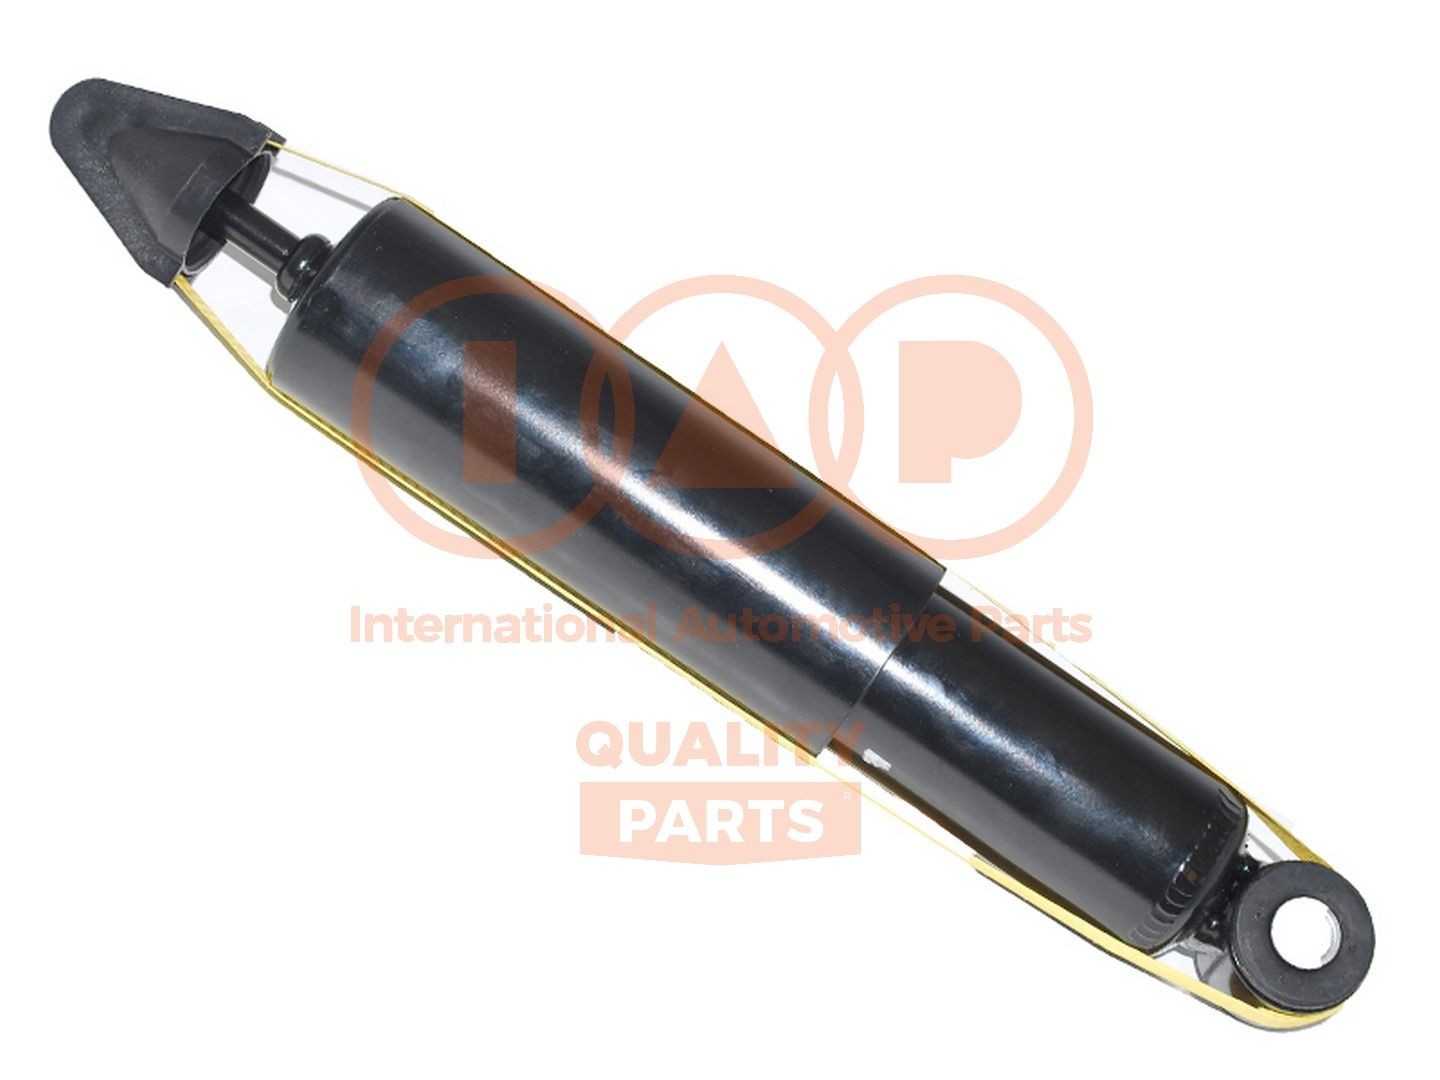 IAP QUALITY PARTS 504-13043 Shock absorber 22 081 311